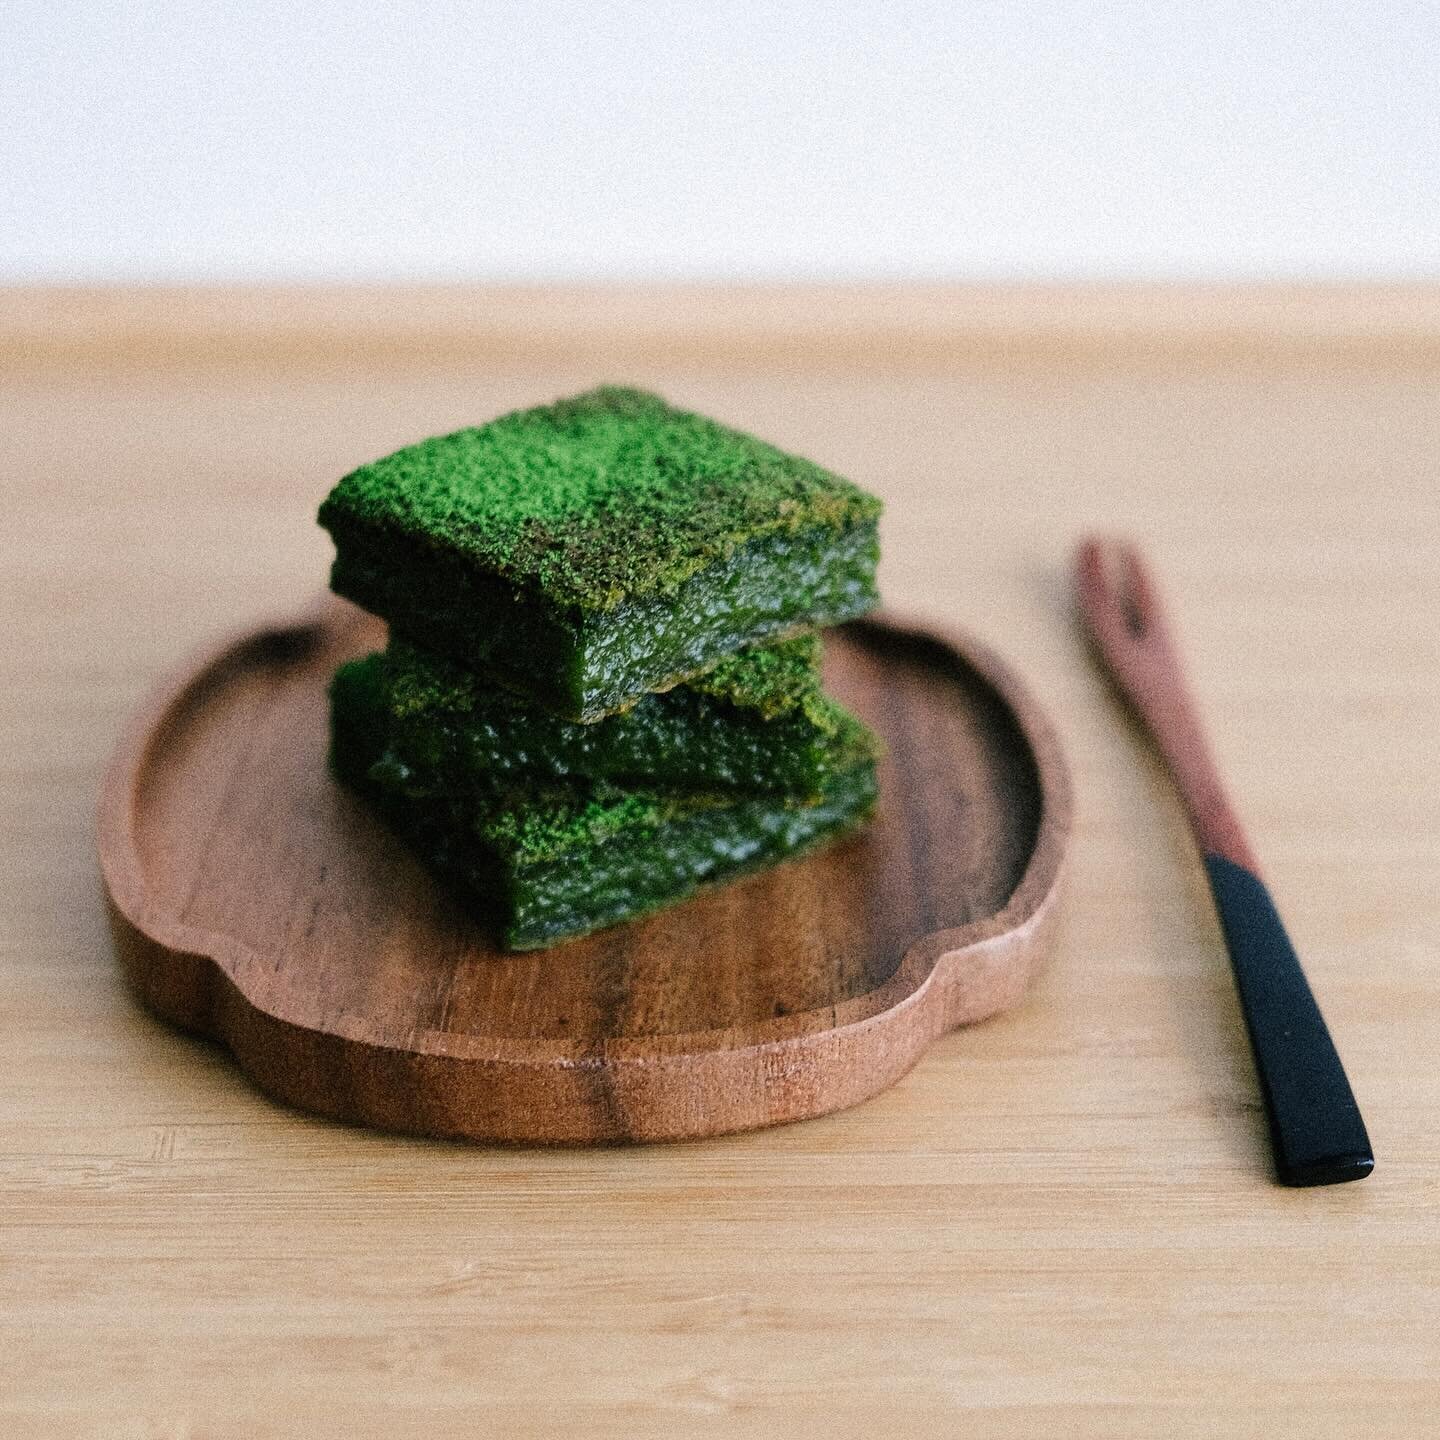 Matcha mochi brownies to celebrate the new year. Wishing everyone a fulfilling and happy 2024 🍵

Gooey mochi-mochi texture brownies that are super easy to make. Recipe below.

Ingredients
	&bull;	1&nbsp;C&nbsp;mochiko&nbsp;glutinous rice flour
	&bul